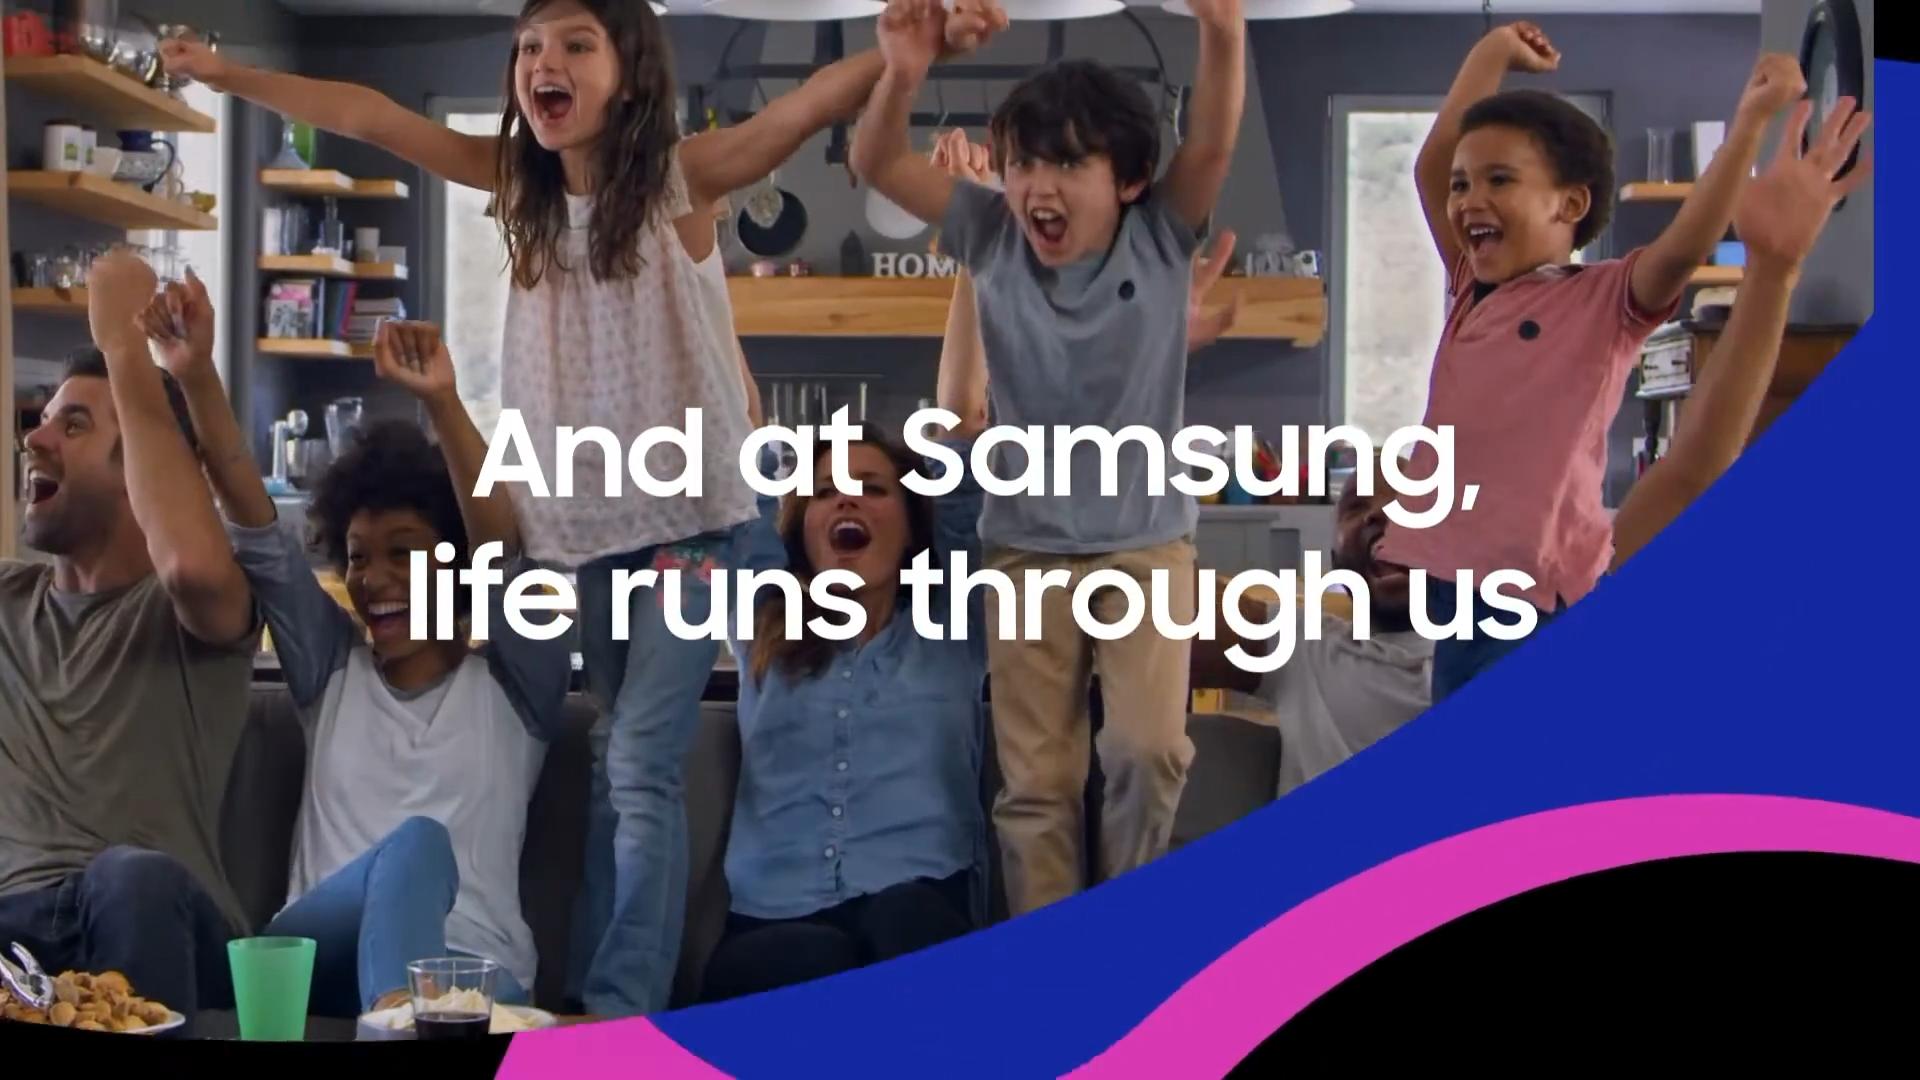 Still frame from Samsung's video. Four adults and three children are on the couch, excitedly smiling, jumping, and raising their hands in the air. Superimposed text reads "At Samsung, life runs through us".